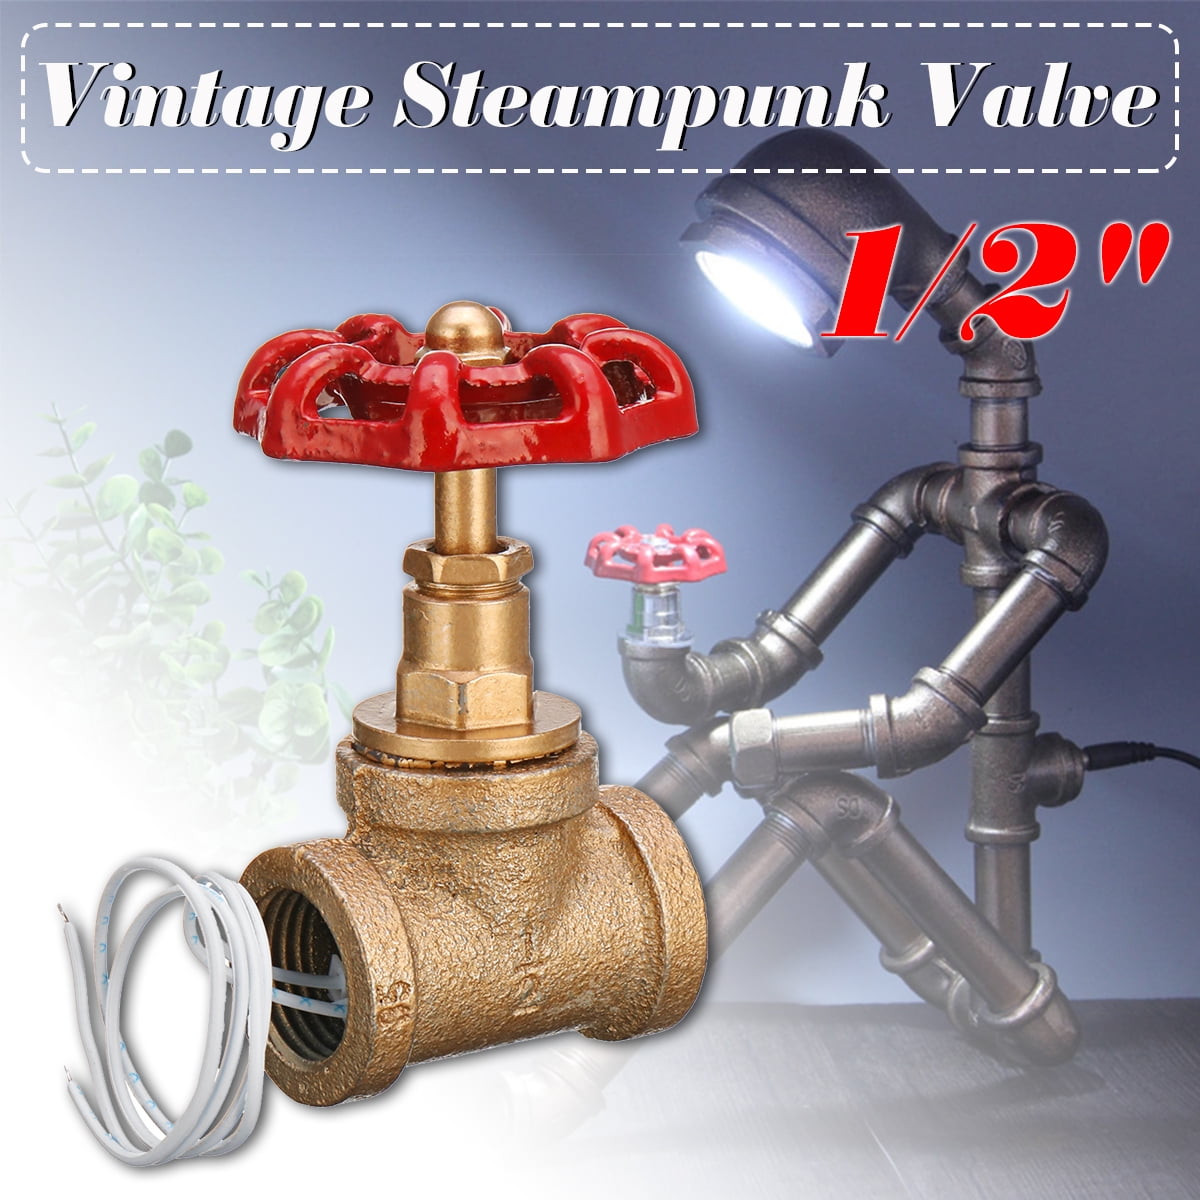 1/2'' Vintage Steampunk Stop Valve Light Switch For Water Pipe Lamp W/Red Handle 